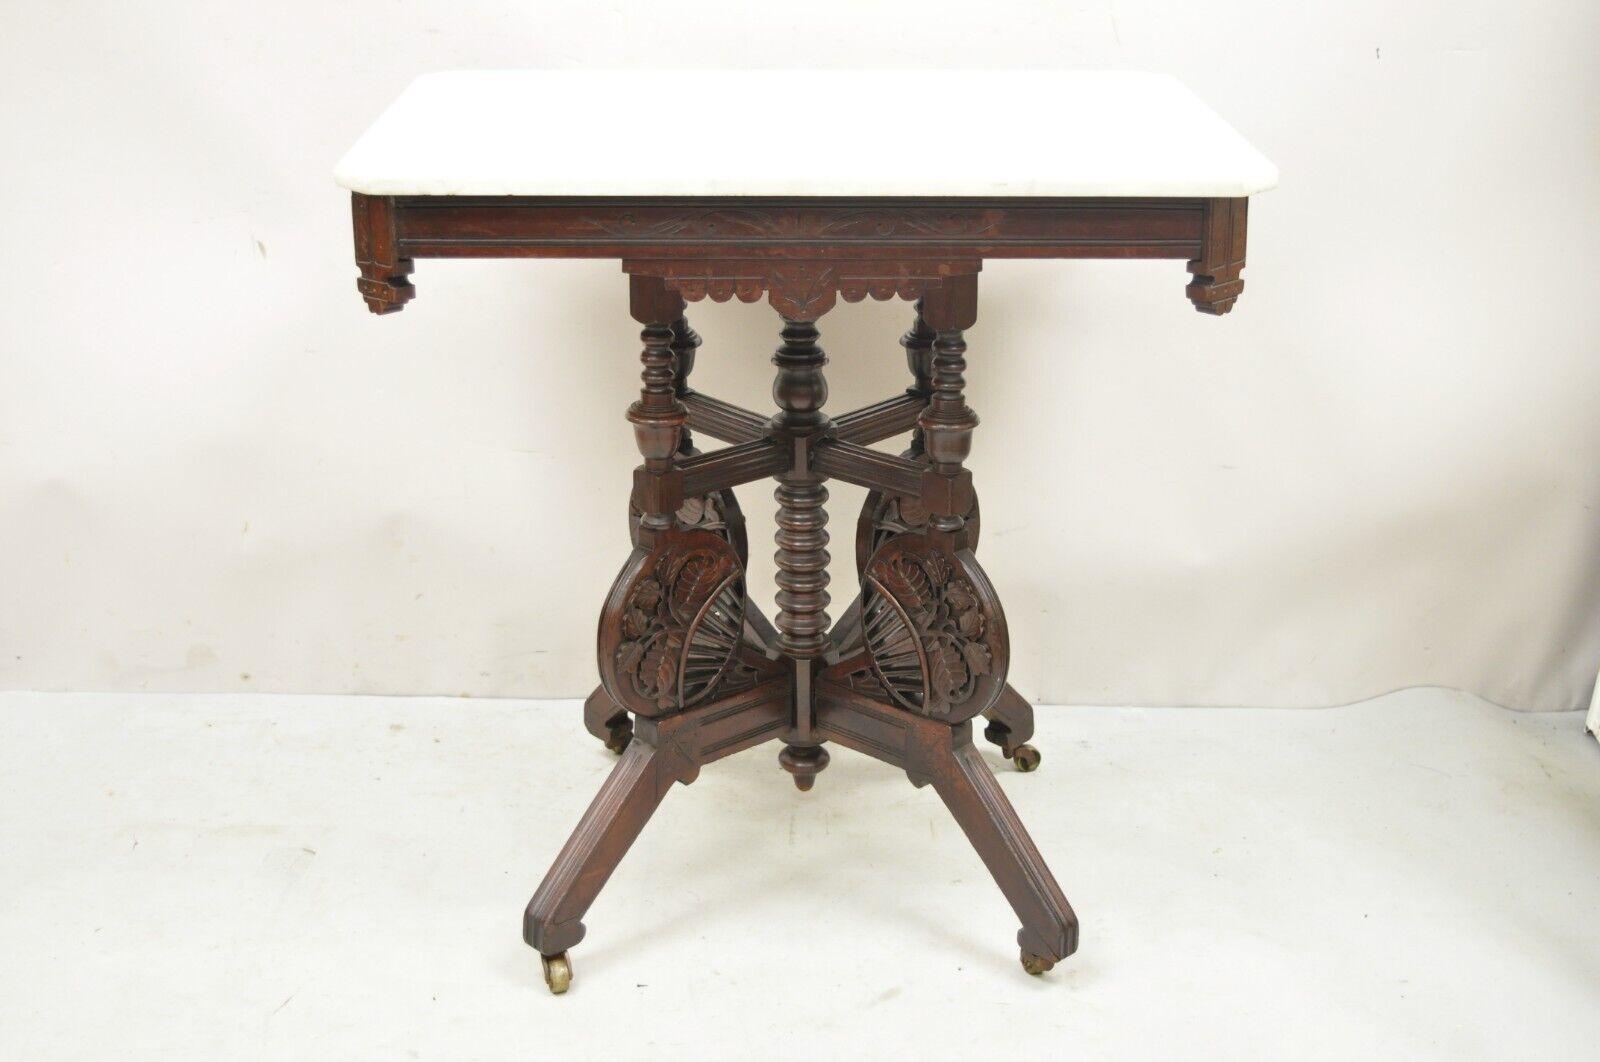 Antique Eastlake Victorian floral carved walnut parlor side table w/ marble top. Item features an ornately carved base with flowers and turn carved spool accents, rolling casters, marble top, very nice antique item, quality craftsmanship. Circa Late